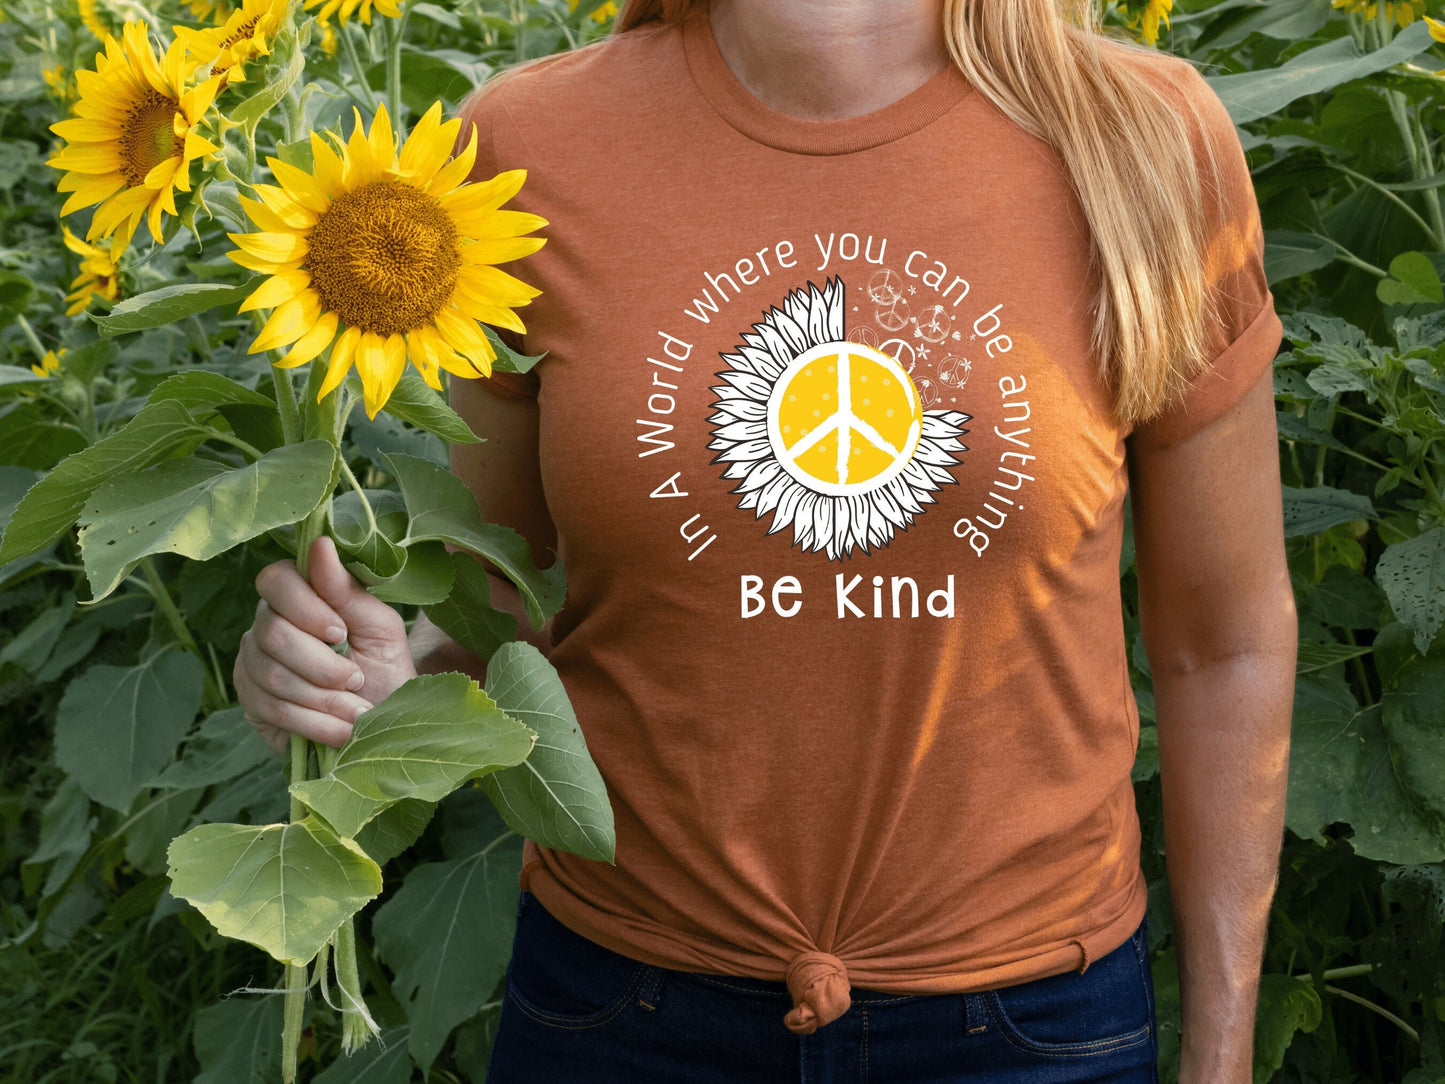 In A World Where You Can Be Anything Be Kind Tee Shirt, Be Kind Shirt, Be Kind TShirt, Kindness Quote, Shirts for Teachers, Choose Kindness